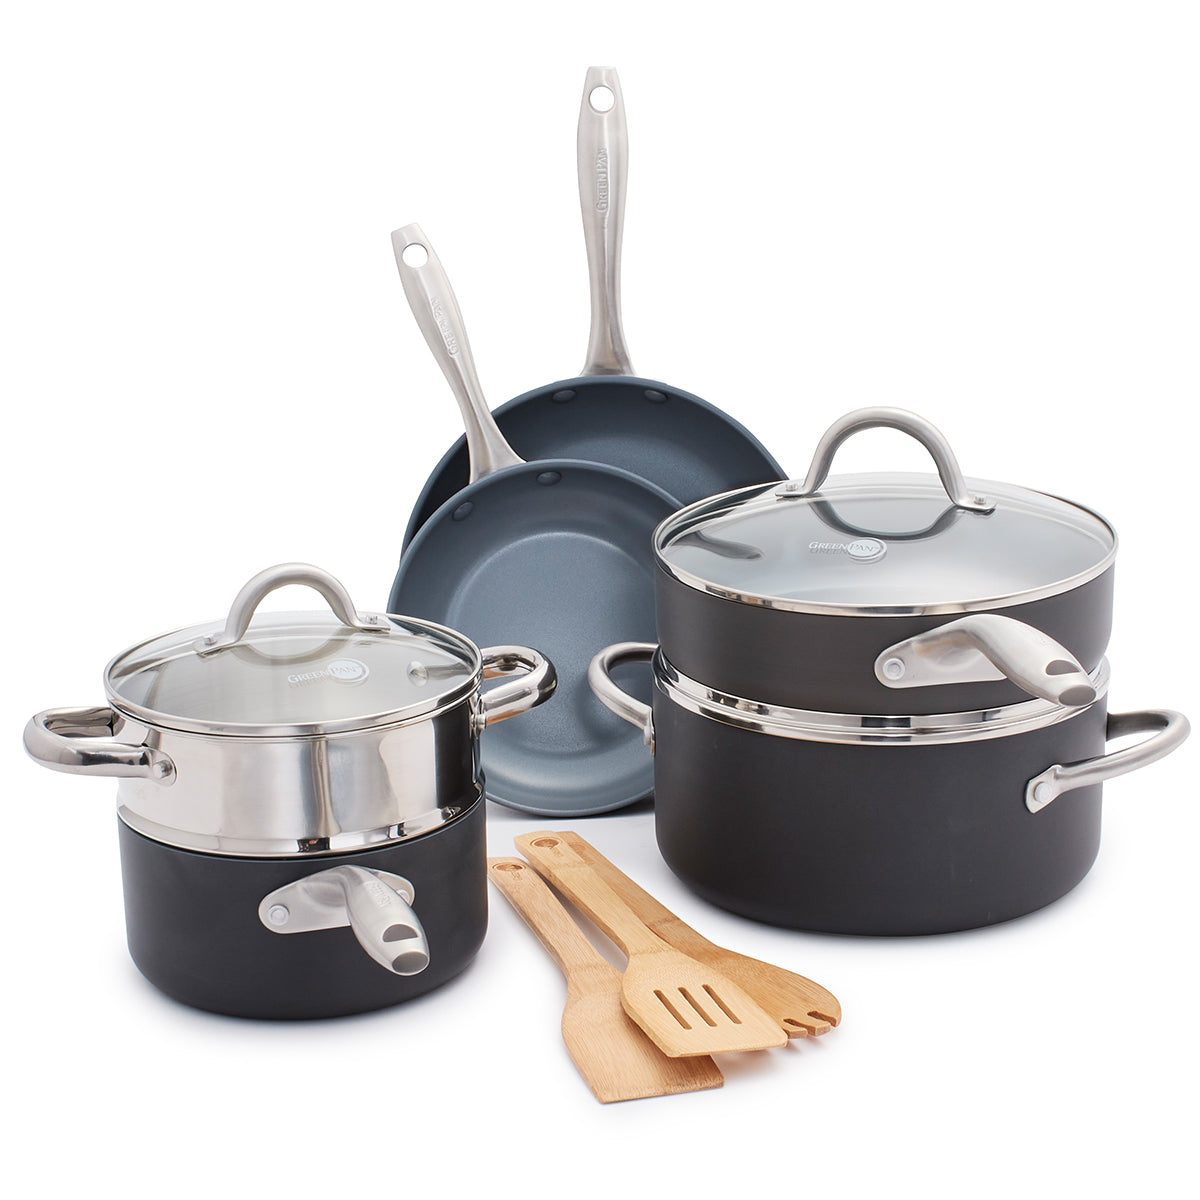 Legend 3-Ply Stainless Steel Cookware Set MultiPly SuperStainless 12-Piece